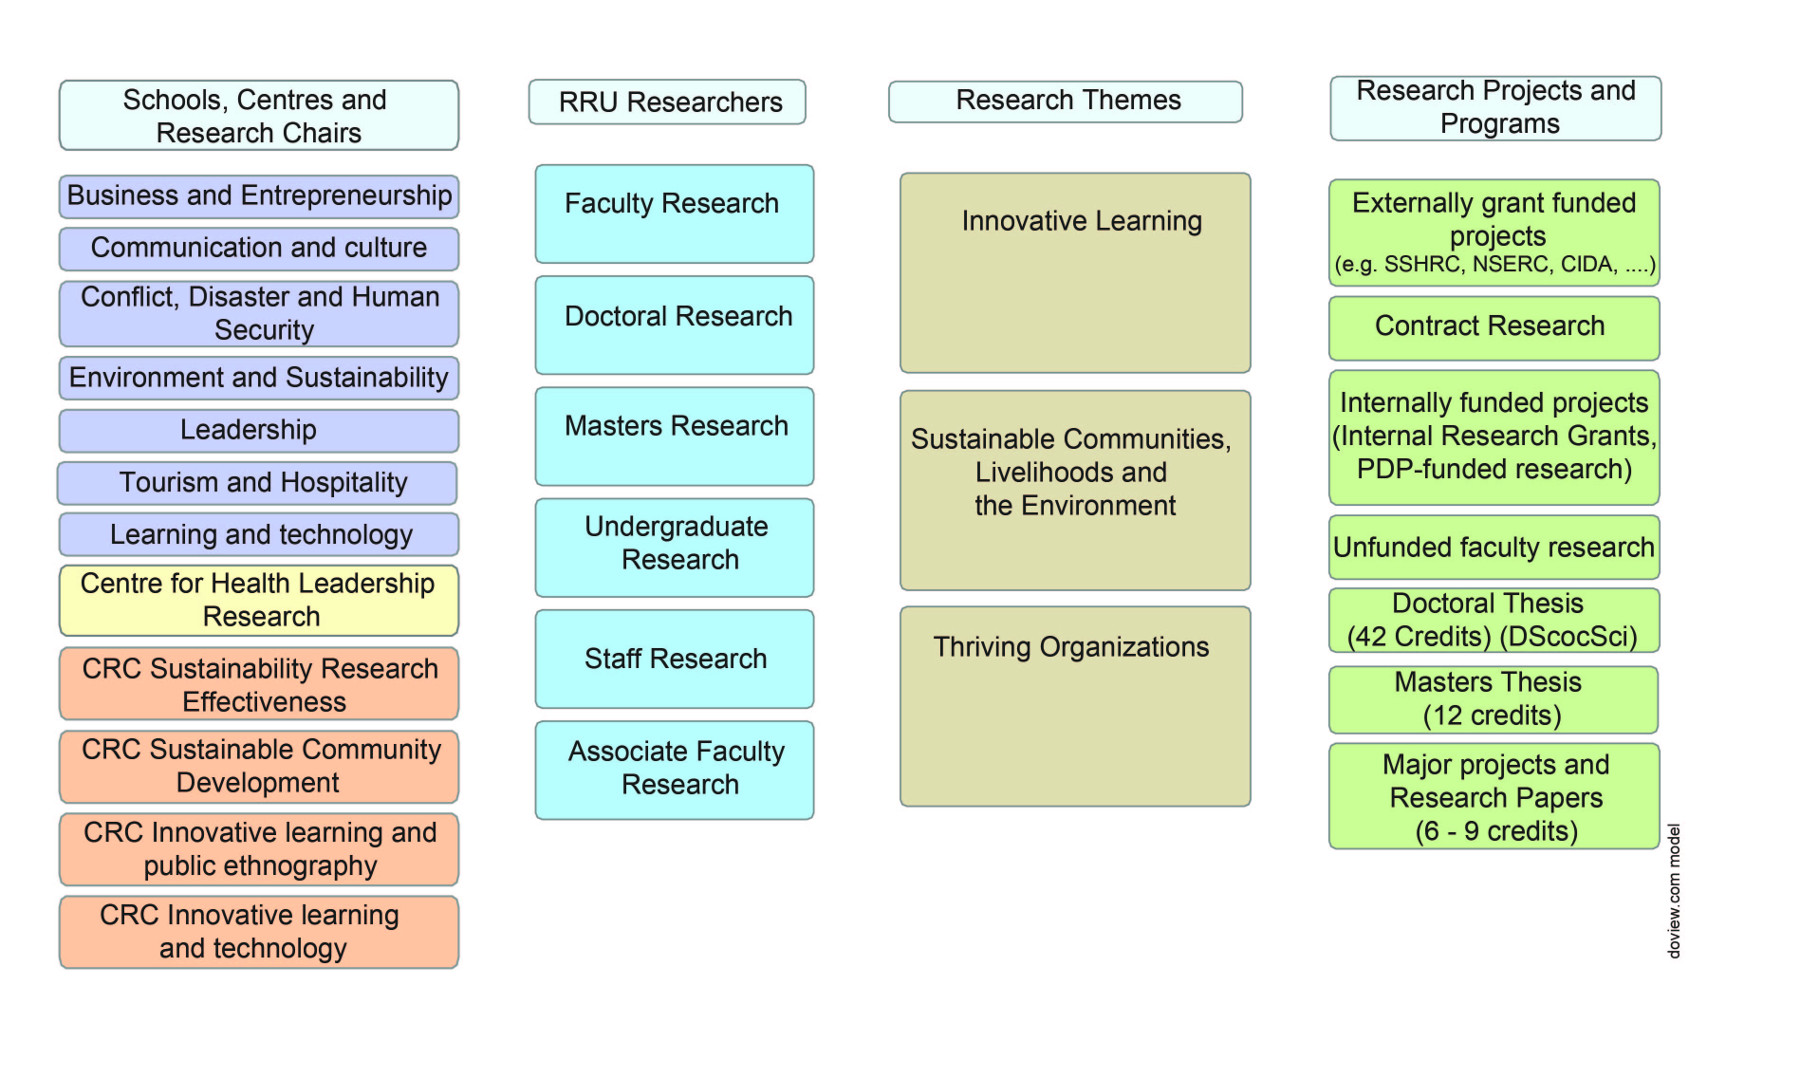 Figure 1. The RRU Research Environment.